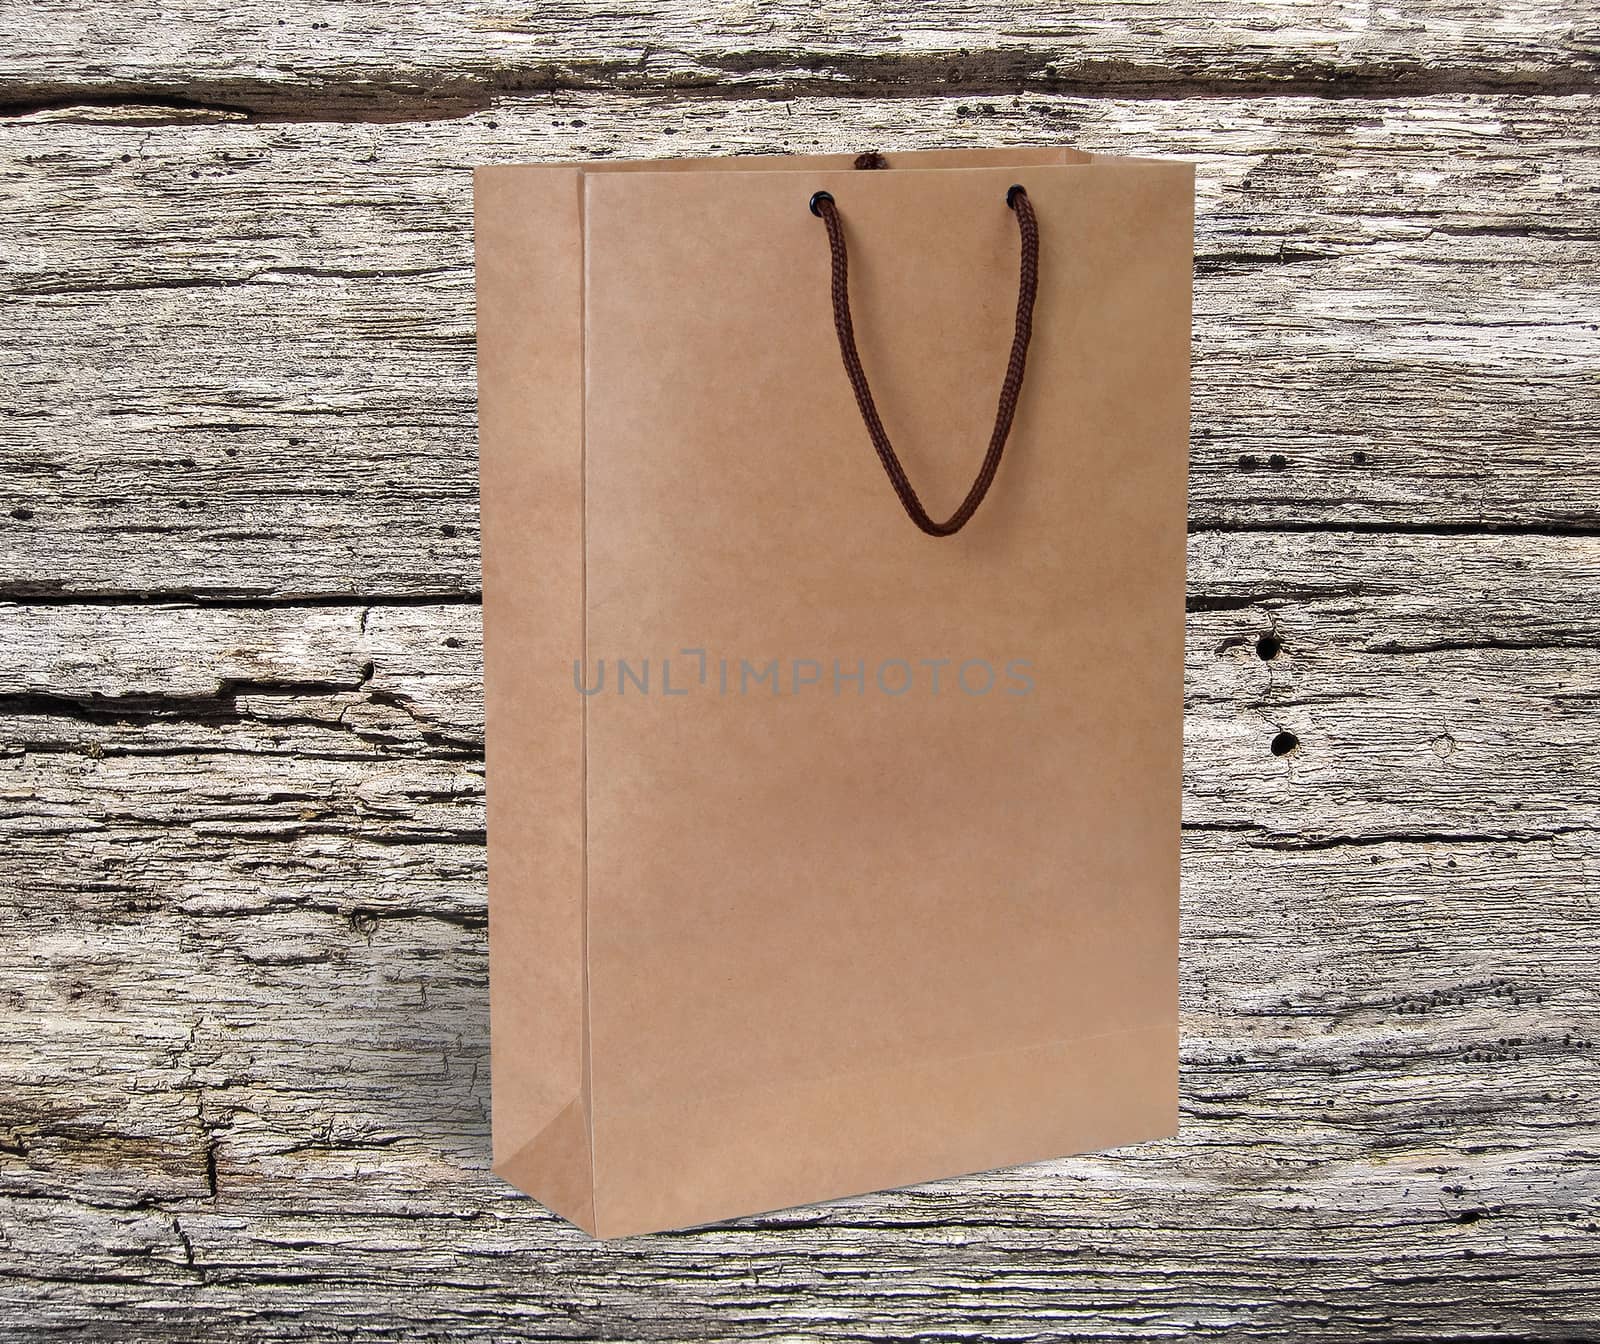 paper bag for shopping on a wooden background